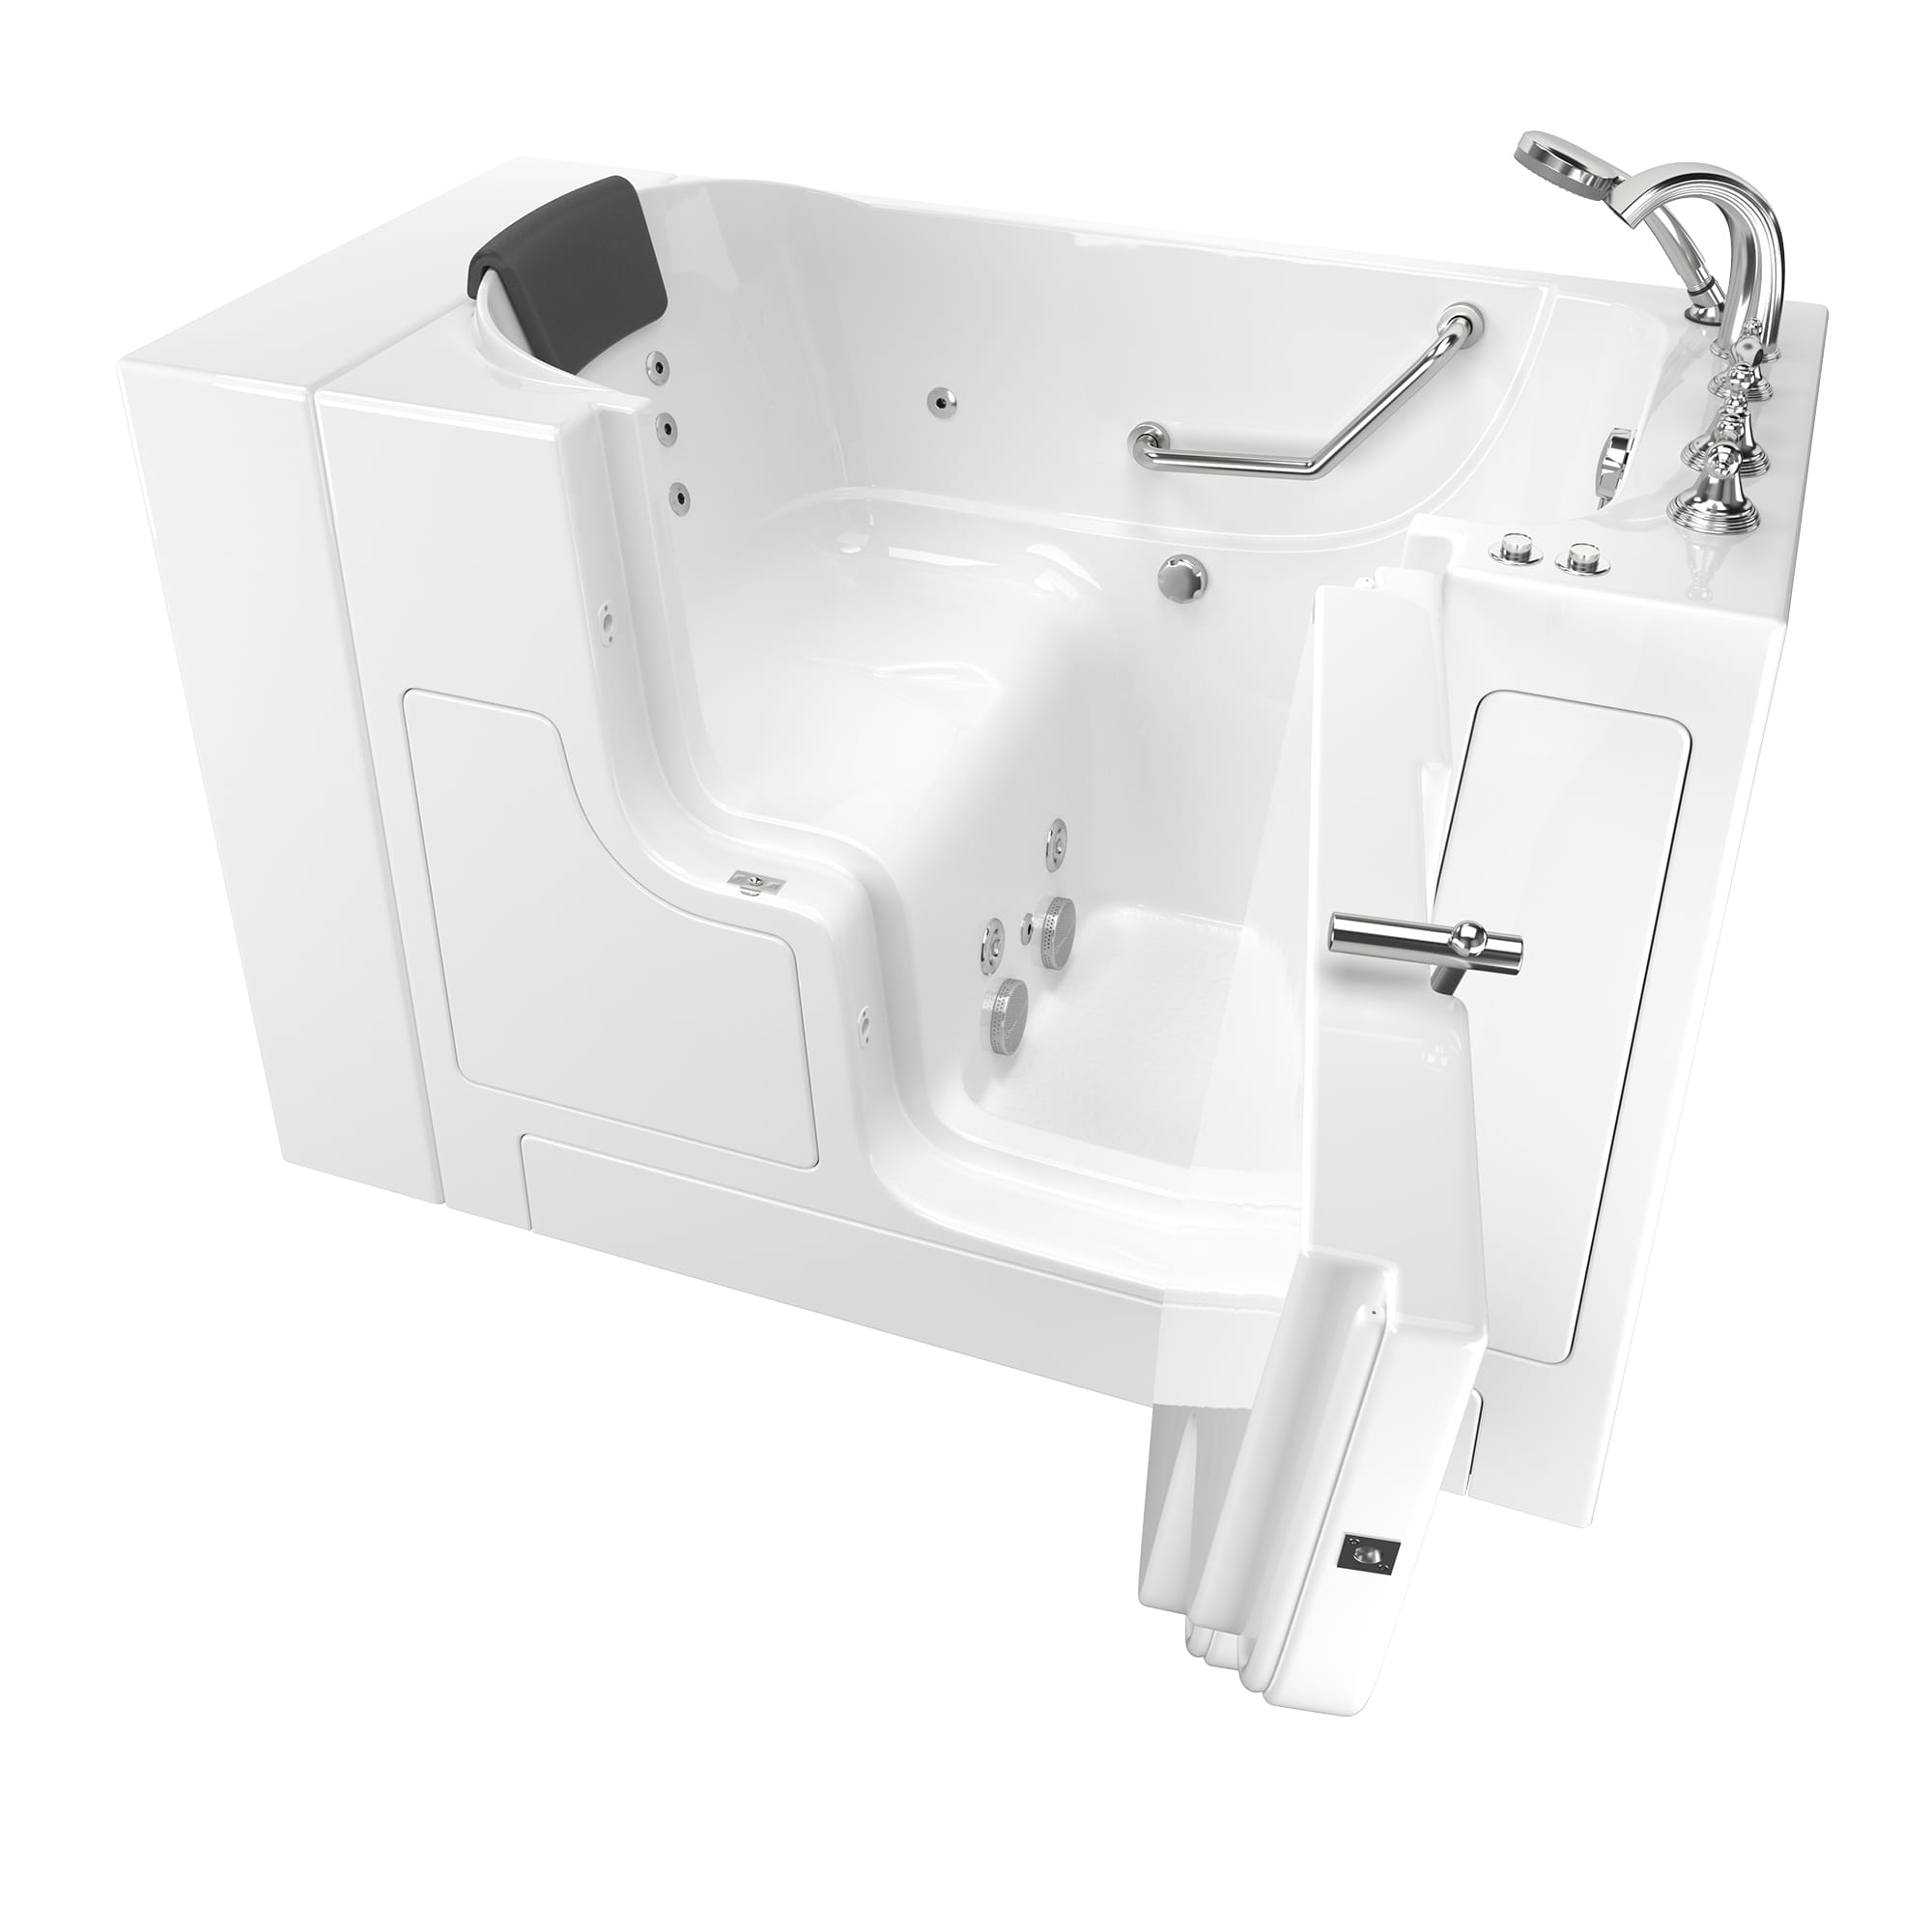 Gelcoat Premium Series 30 x 52 -Inch Walk-in Tub With Whirlpool System - Right-Hand Drain With Faucet